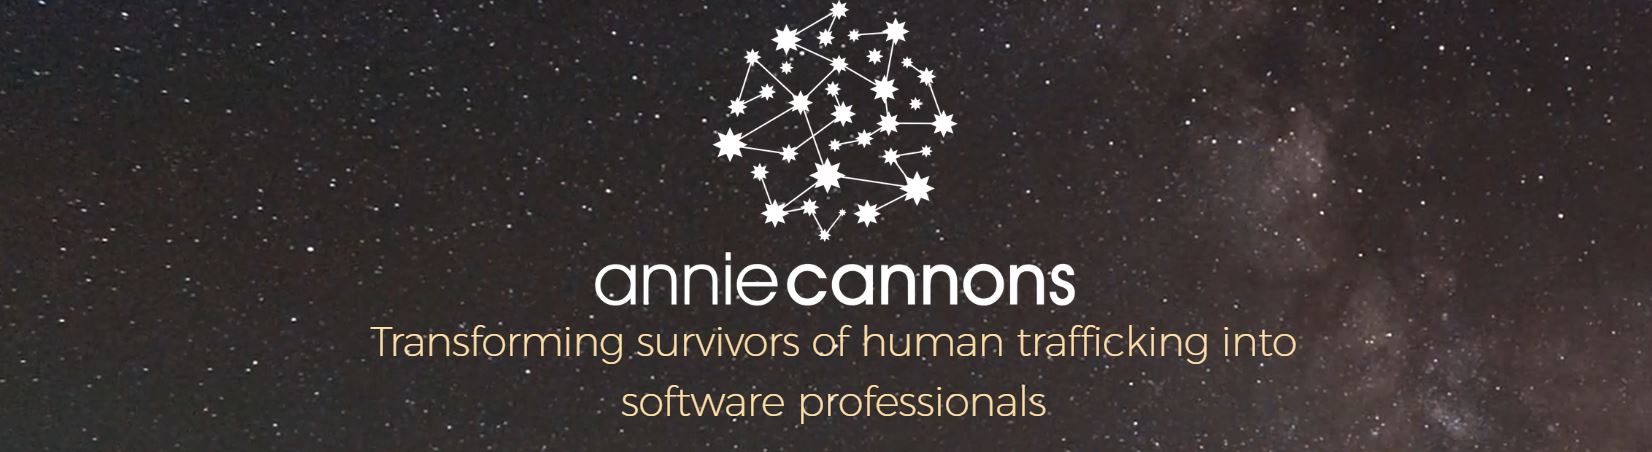 How a nonprofit partner in economic empowerment provides tech training to survivors of human trafficking